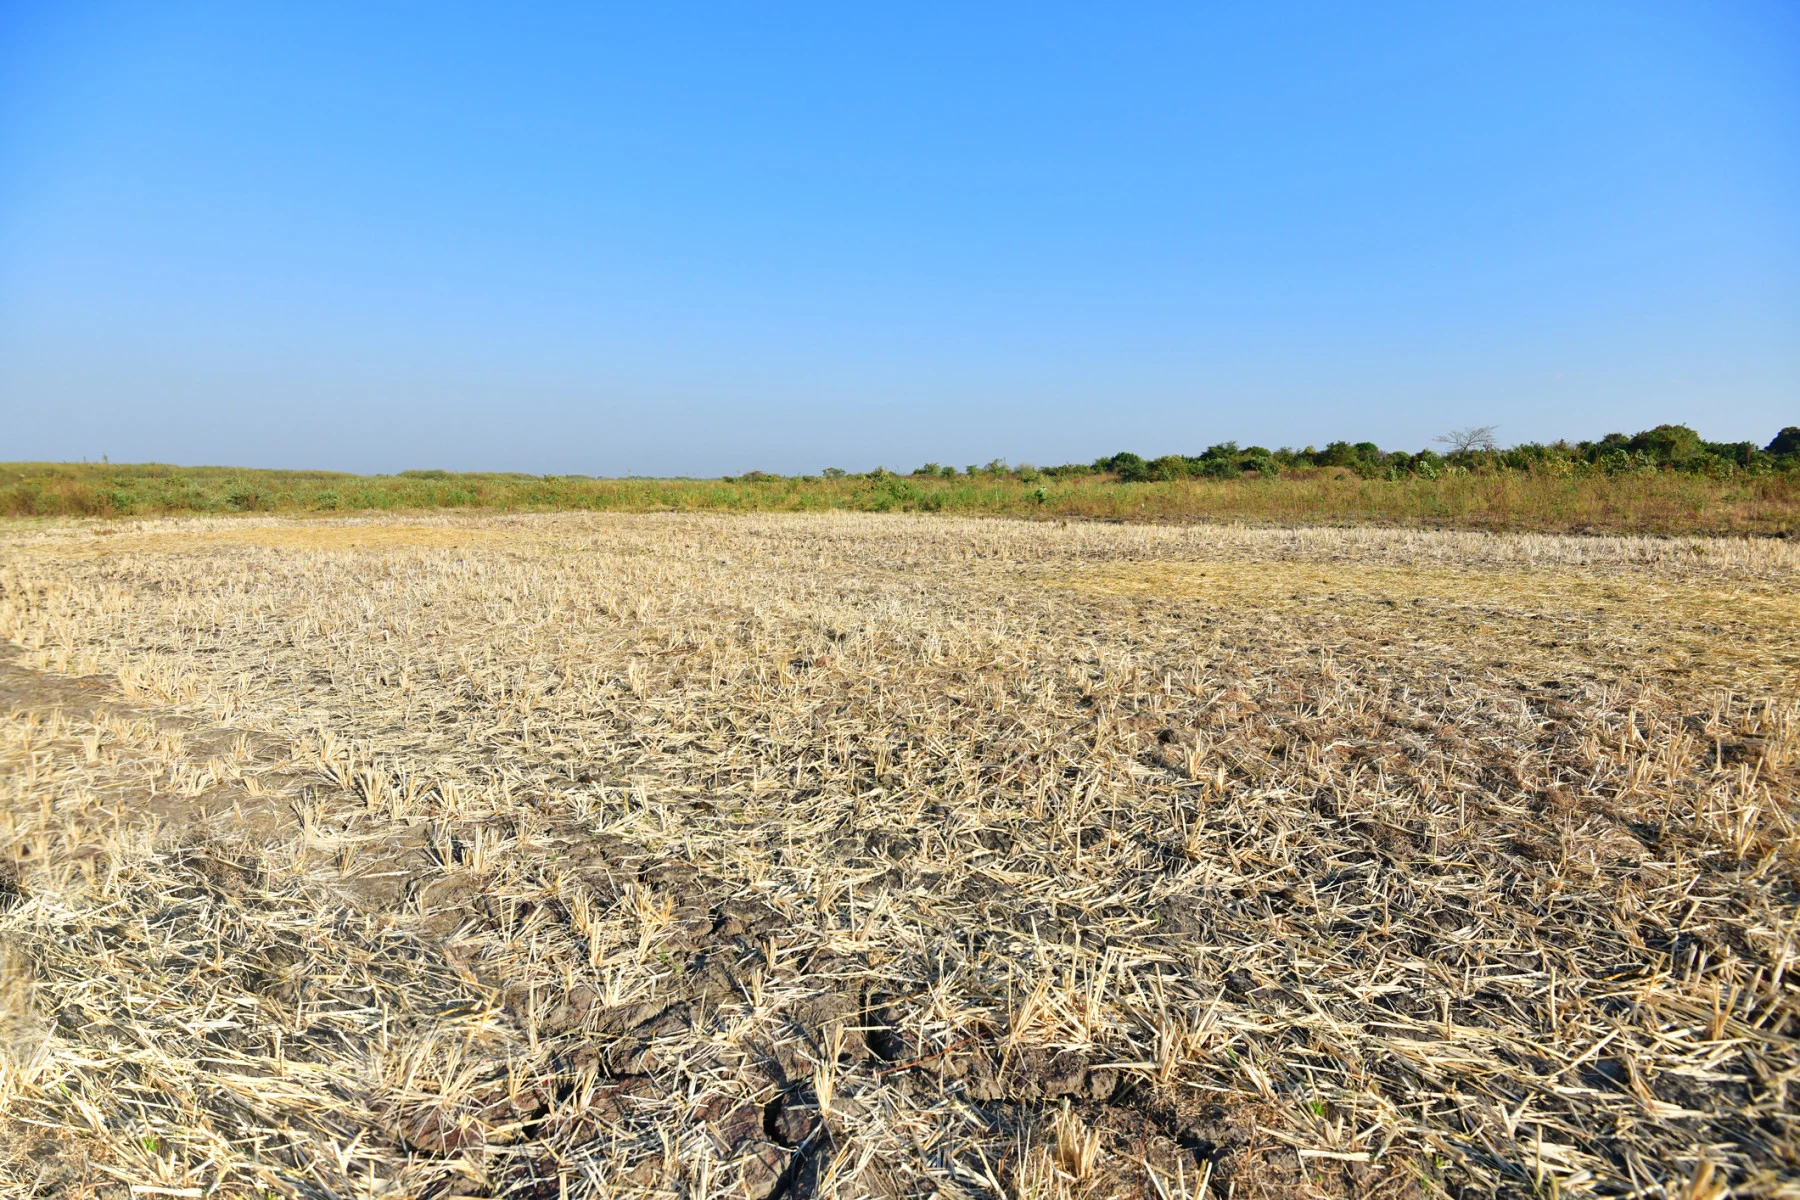 drought in tanzania (Michele D'Amico/ Moment/ Getty Images)